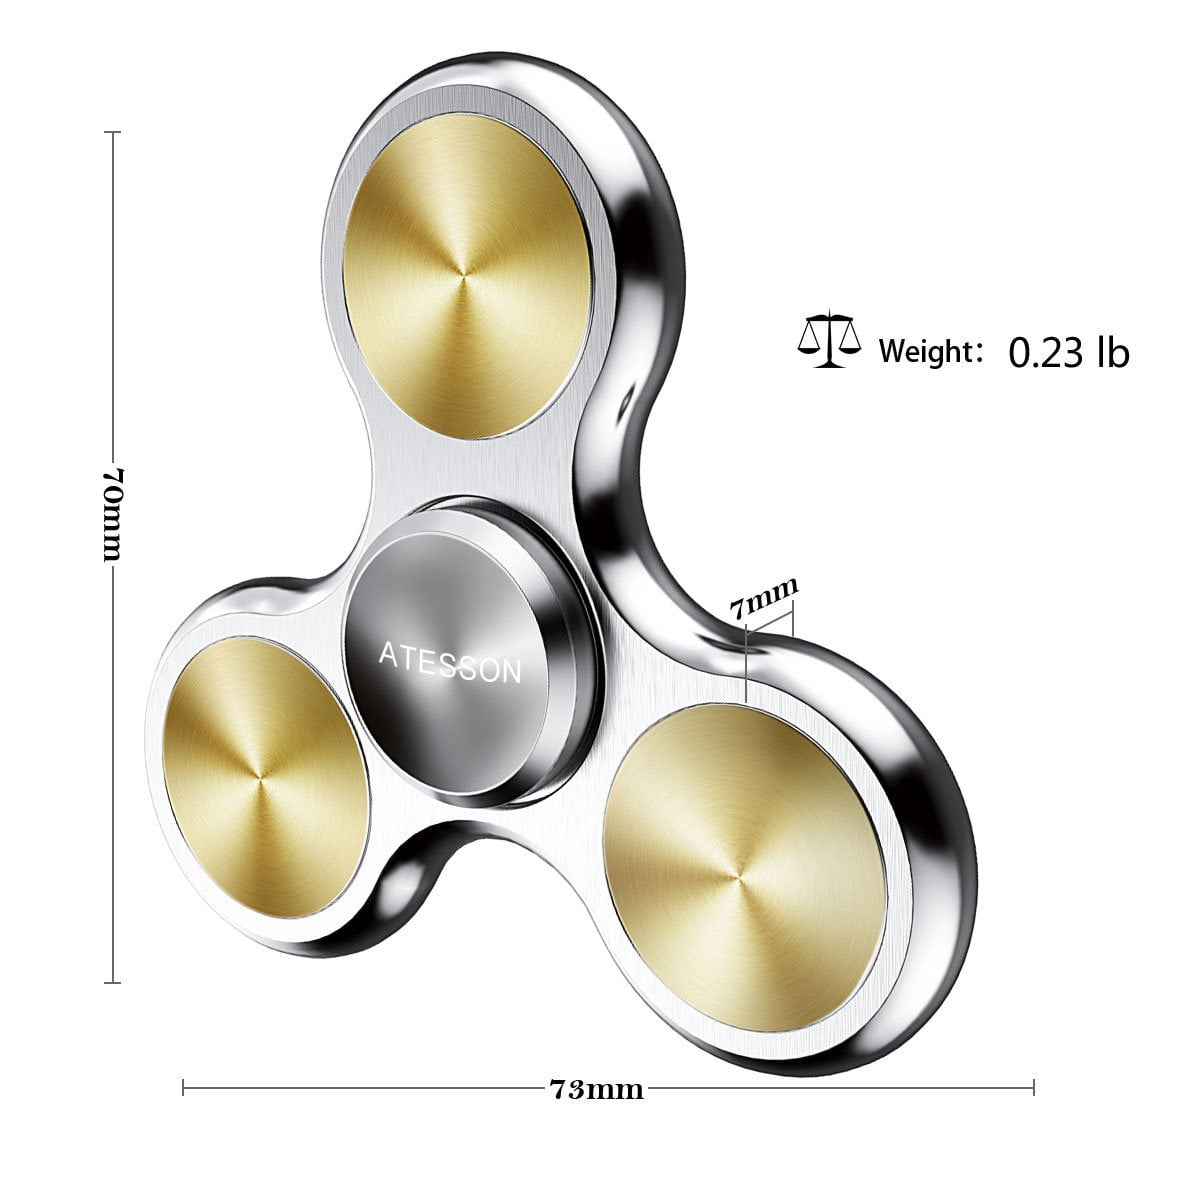 ATESSON Fidget Spinner Toy 4 to 8 Min Spins Durable Stainless Steel Bearing High Speed Metal Material Hand Spinner Stress Relief Boredom Killing Time Toys 